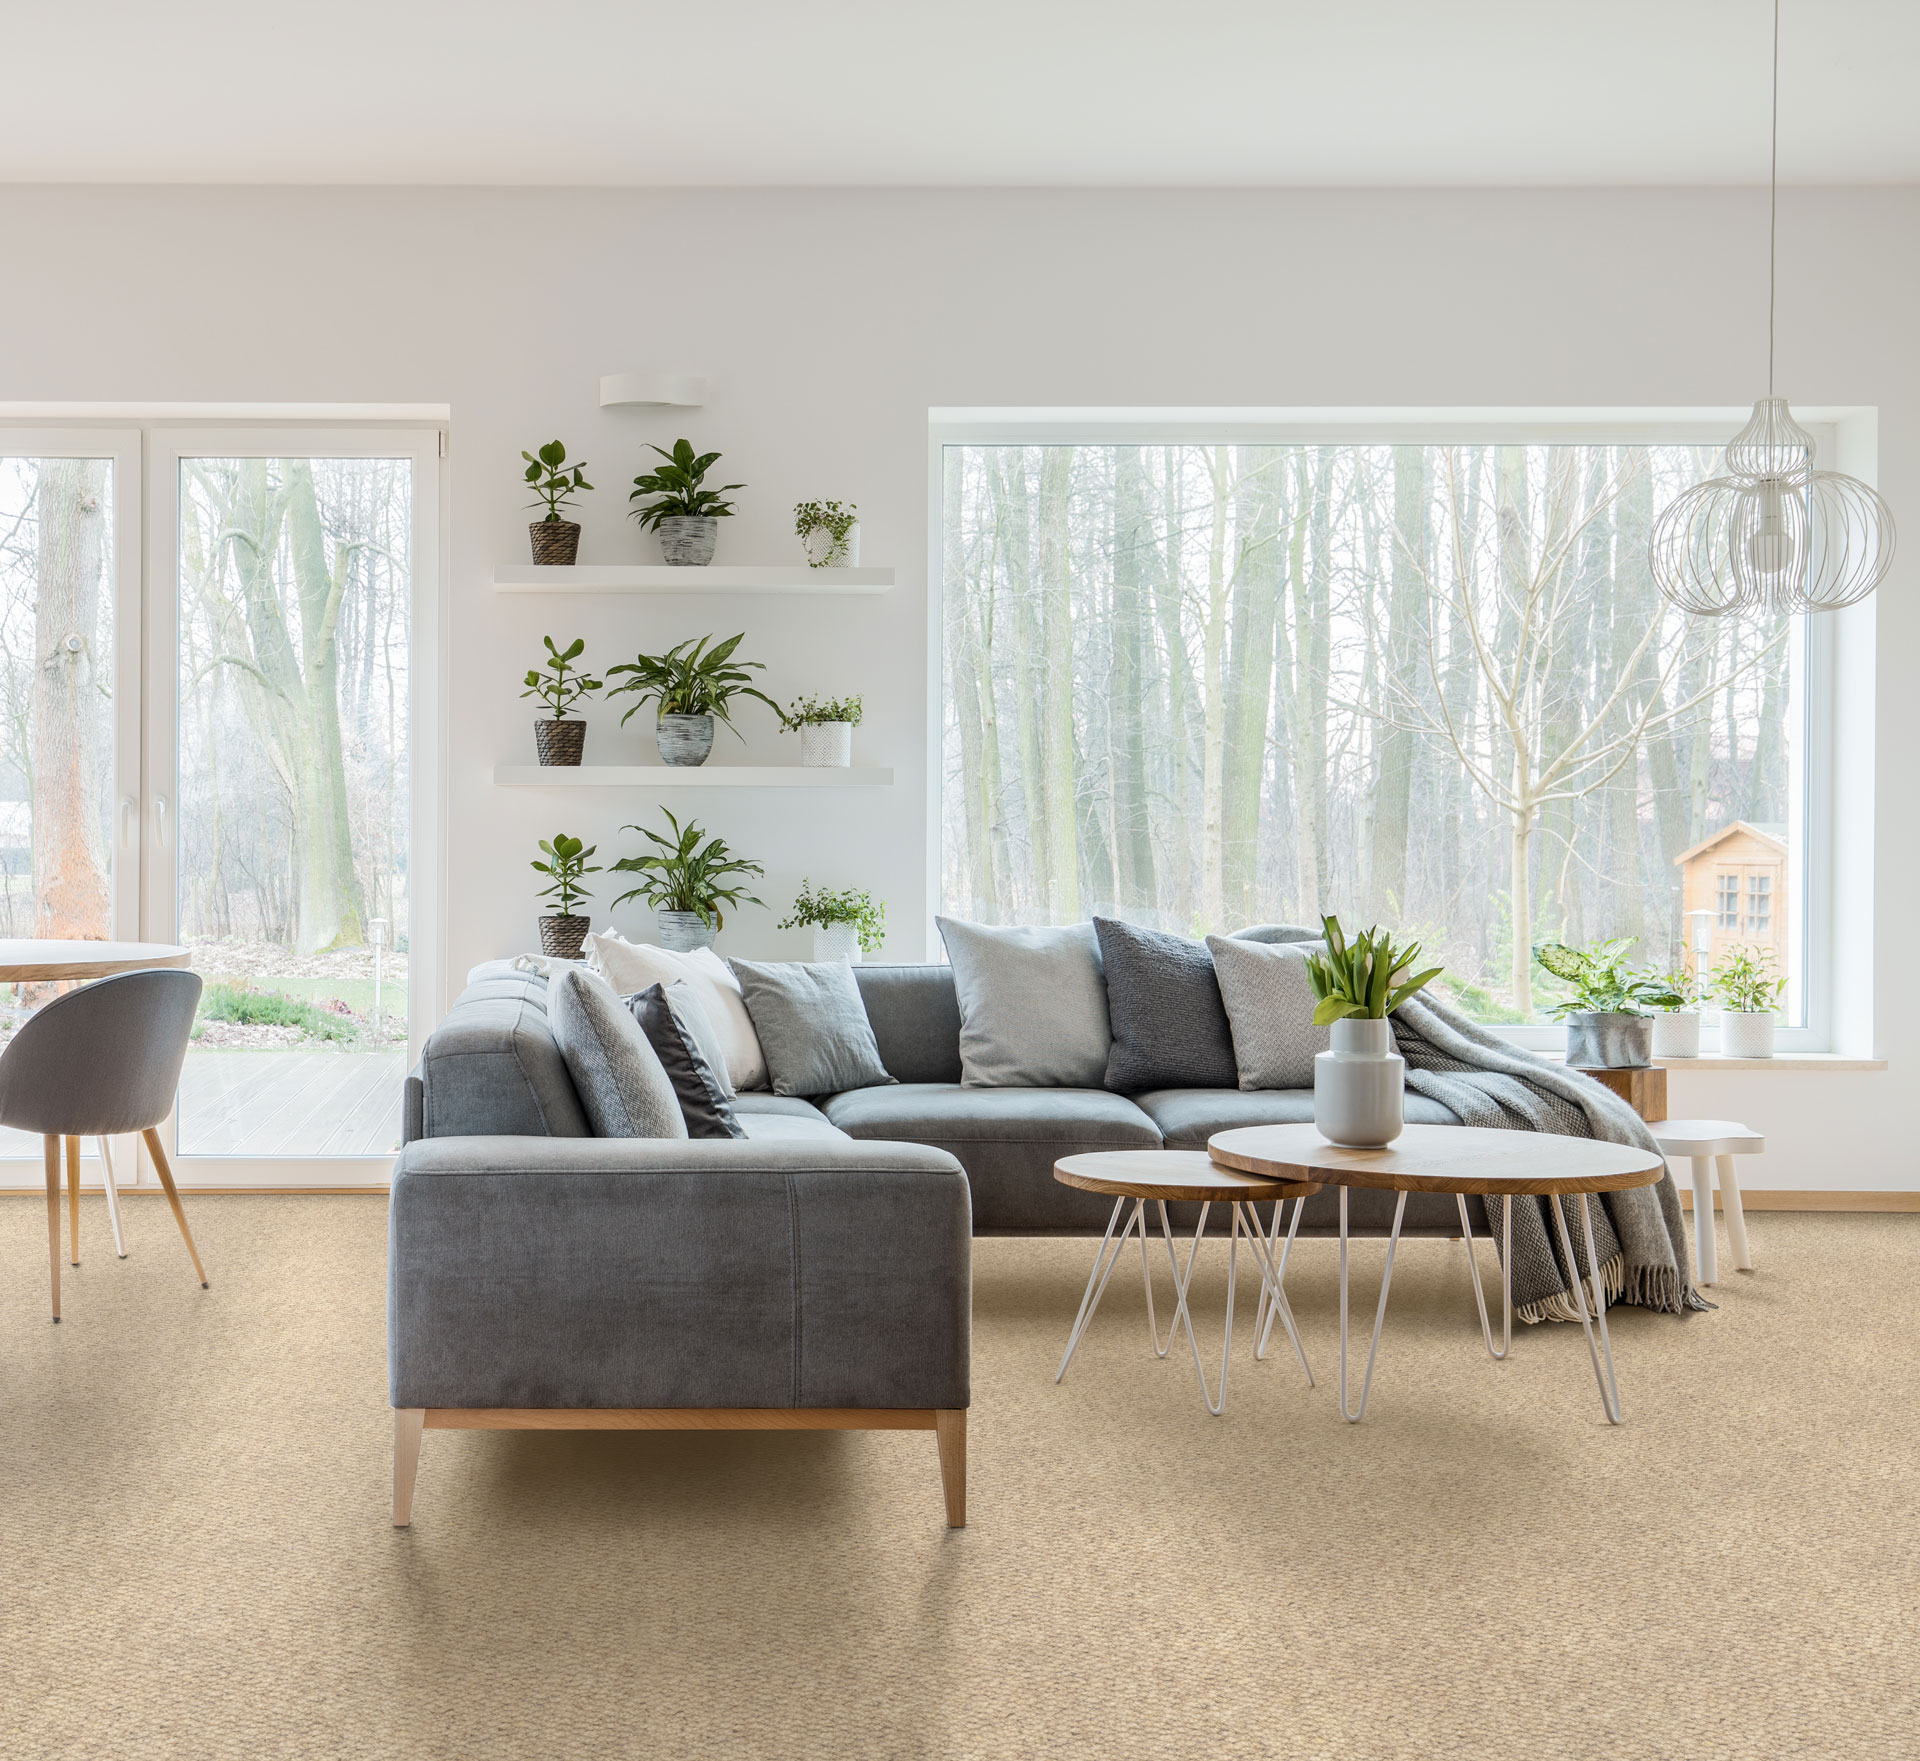 Natural Choice Textures 100% wool carpet by Ulster Carpets. Image credit Credit-Ground-Picture_Shutterstock.com_1342111172